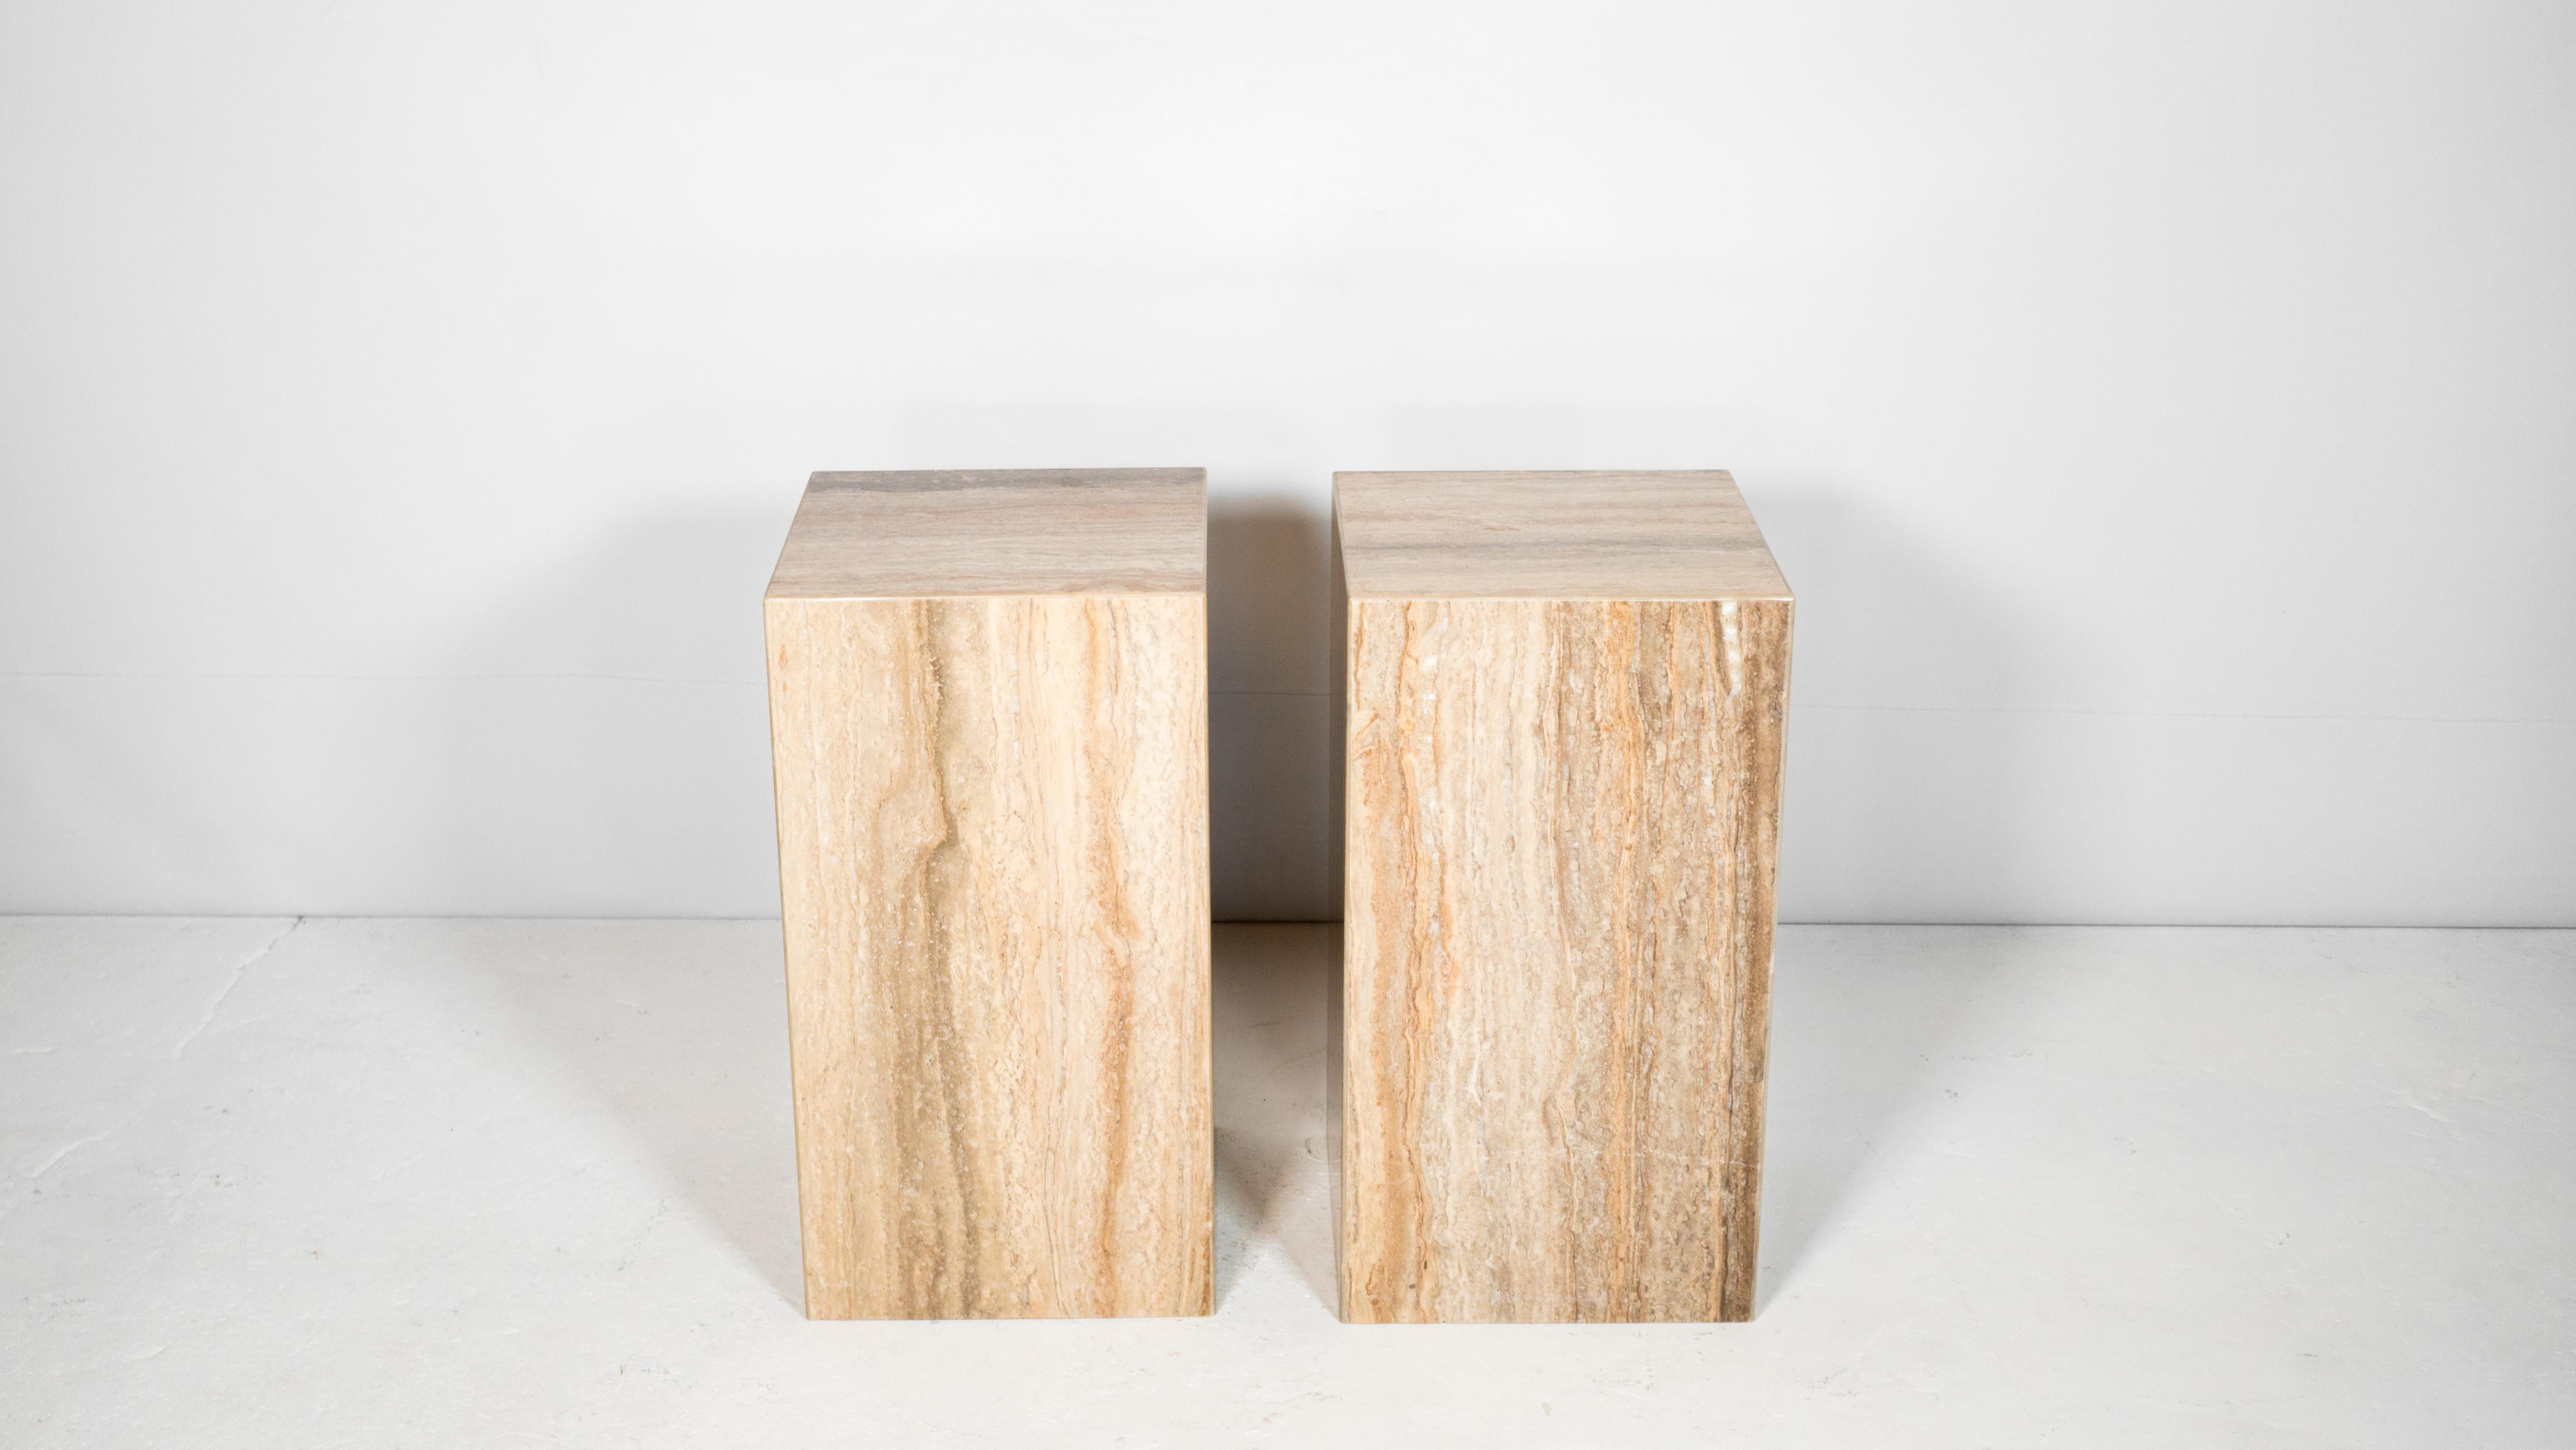 1980s Italian Polished Travertine Tower Cube Side Tables - a Pair For Sale 5